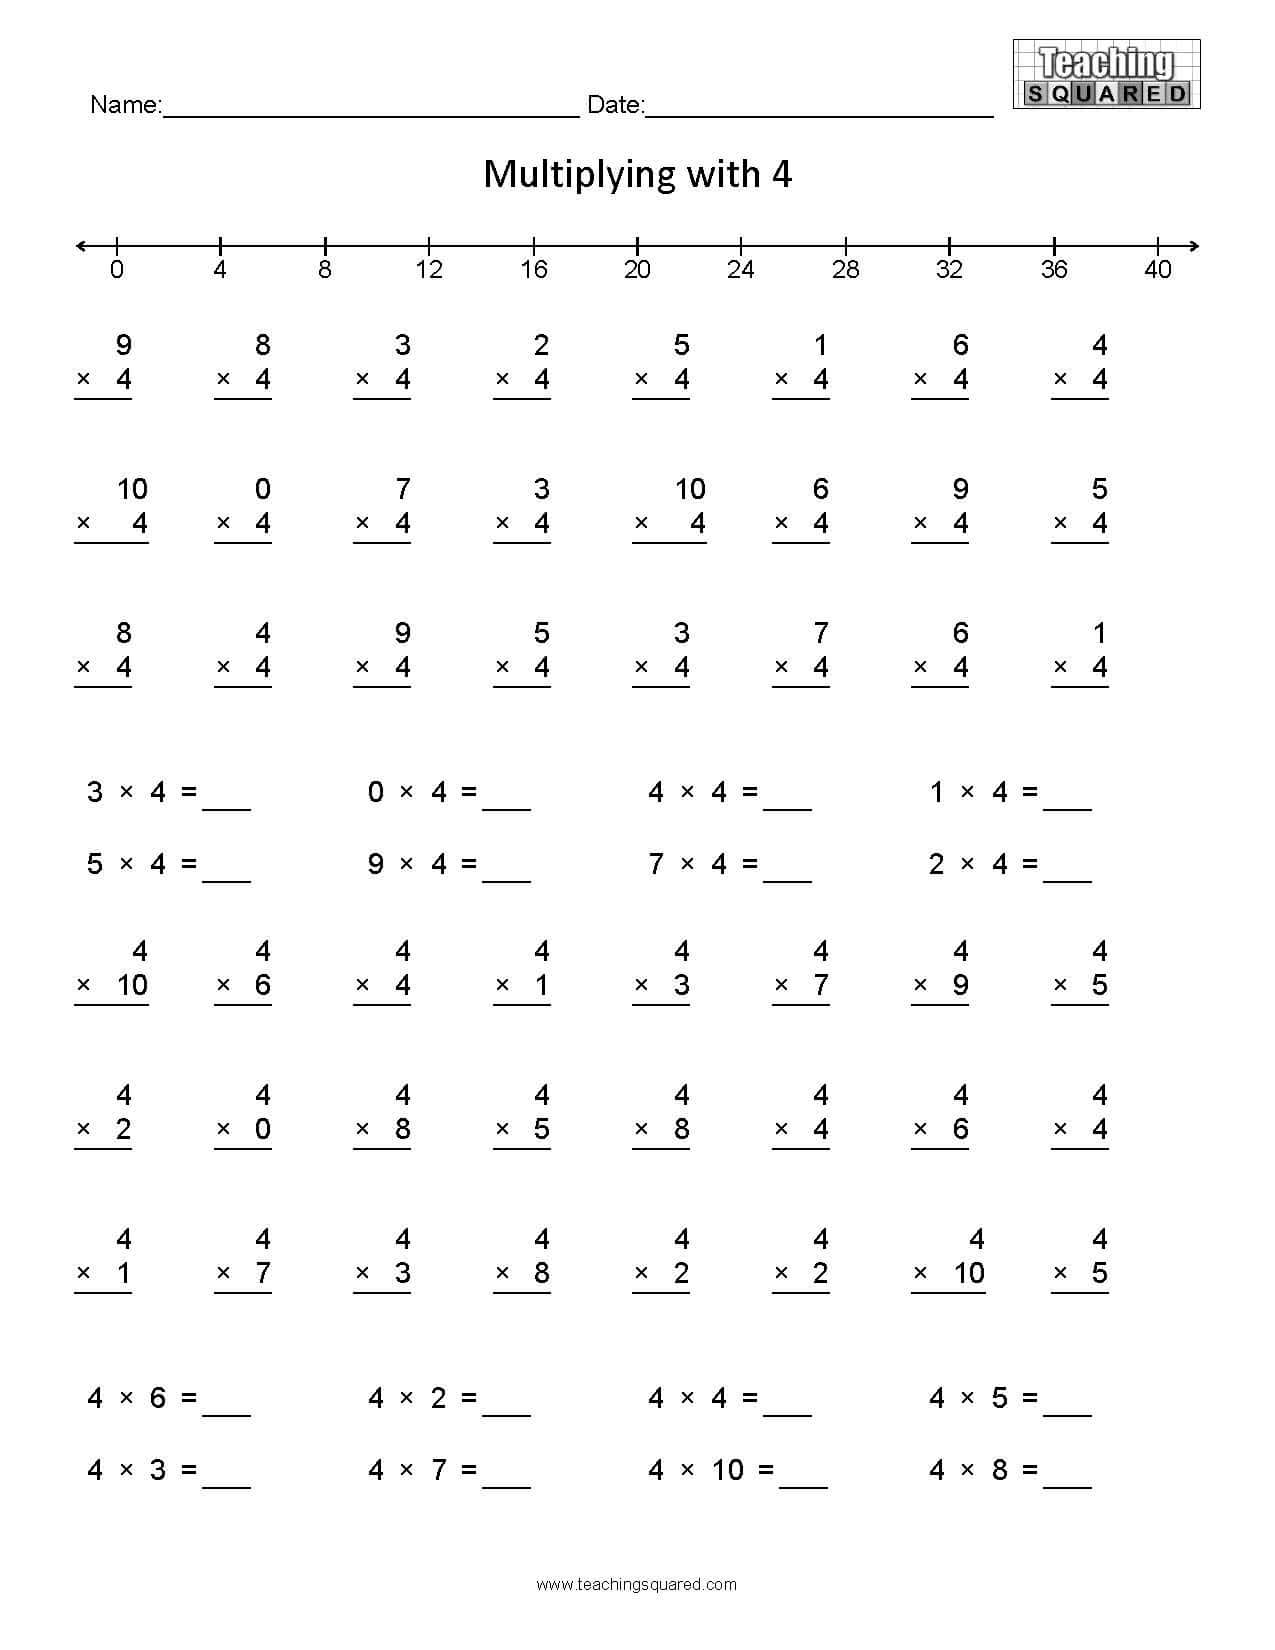 Multiplying with 4 multiplication worksheets